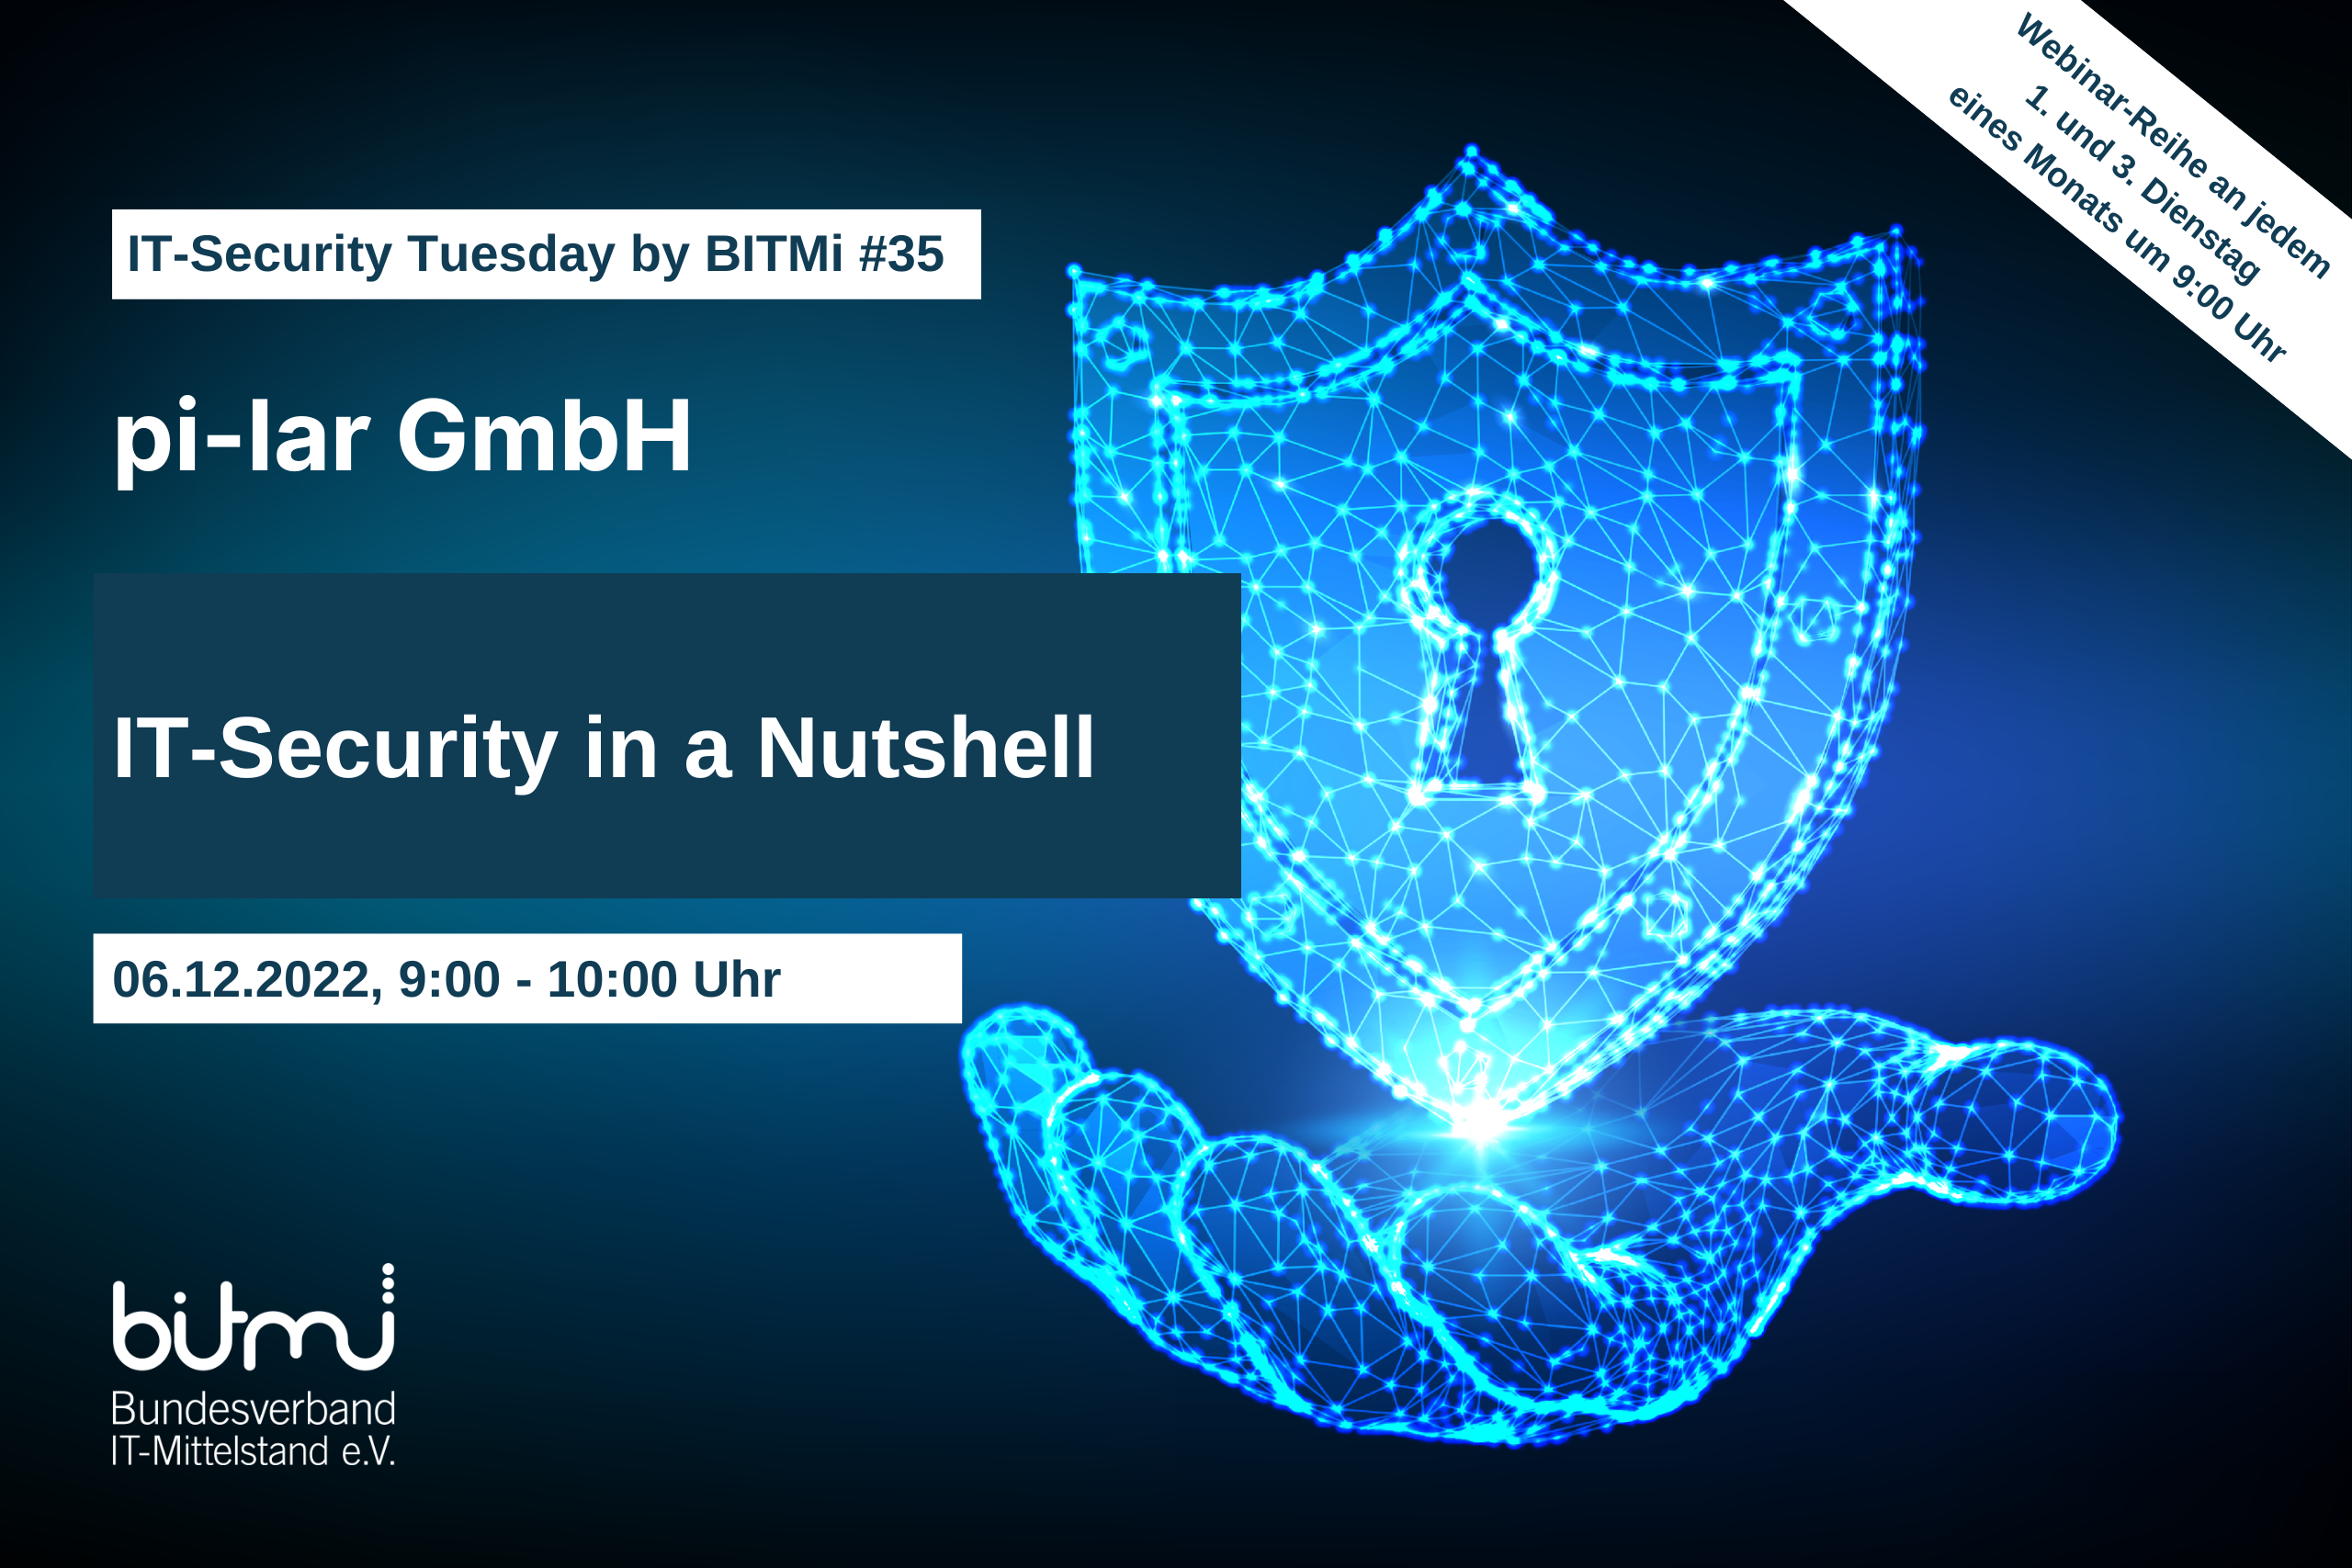 IT-Security Tuesday mit BITMi Mitglied pi-lar GmbH: IT-Security in a Nutshell